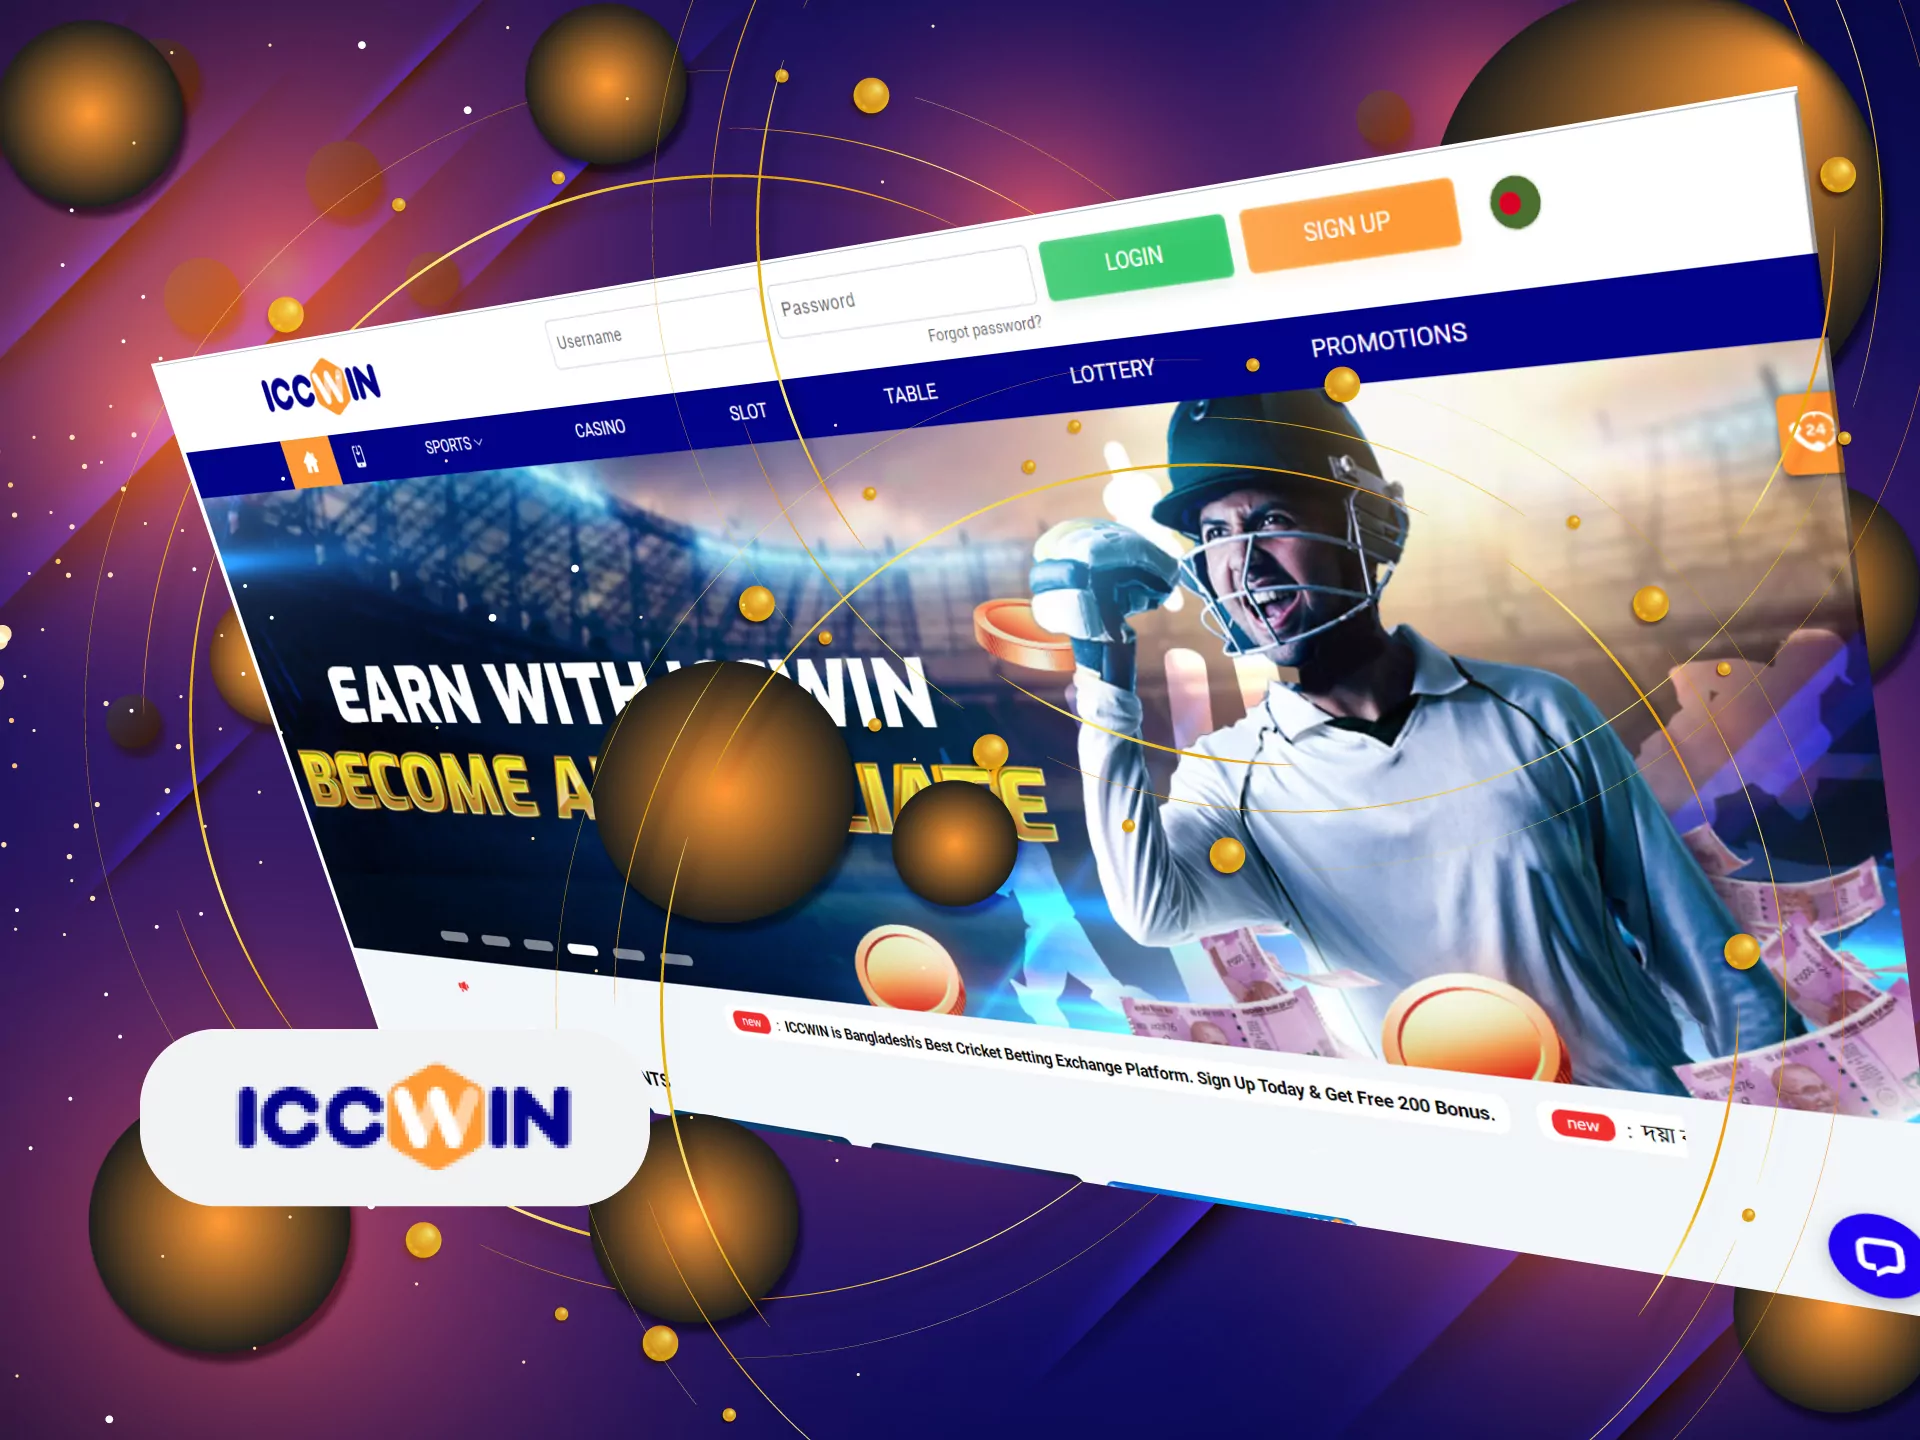 ICCWIN is an official and legal online betting shop in Bangladesh.